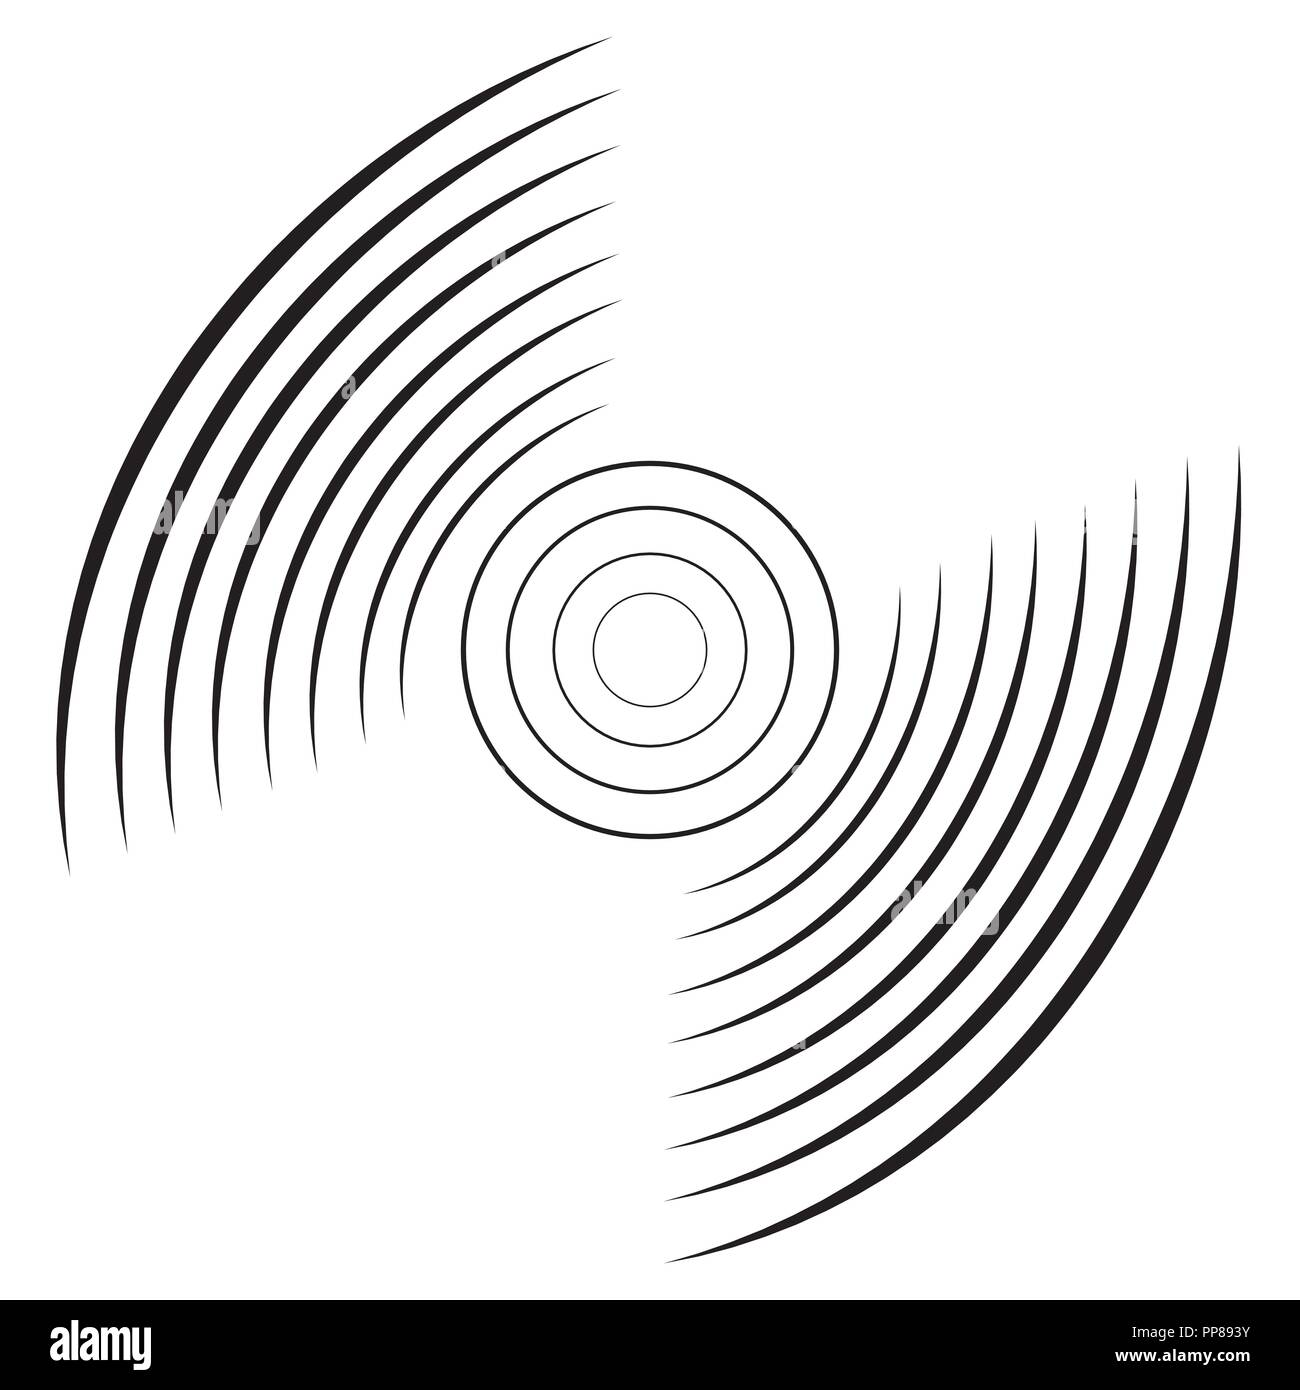 Vector illustration of abstract curves on a white background. Stock Vector